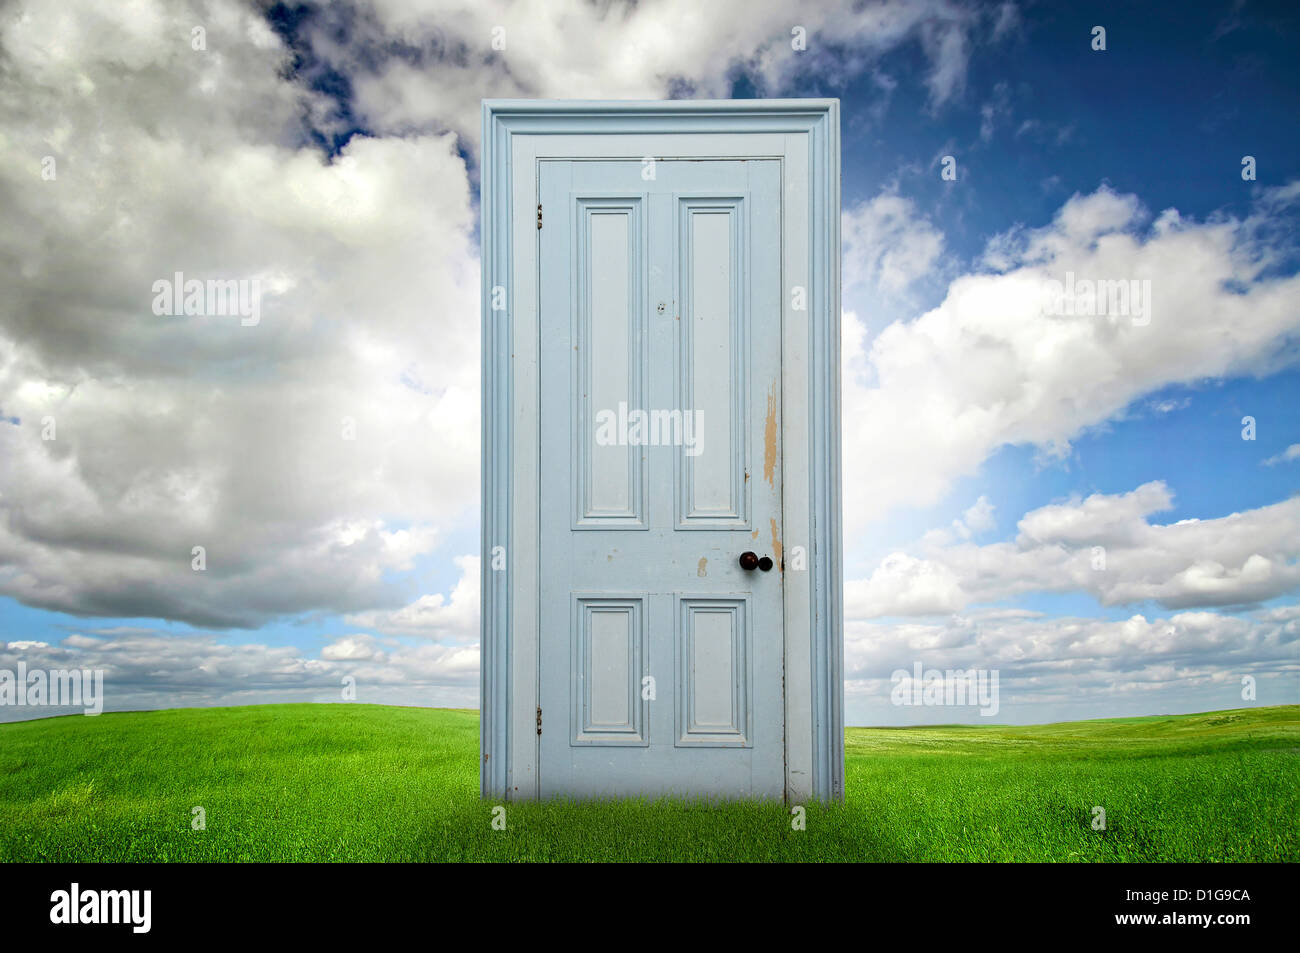 Isolated door in a grass field with blue cloudy sky Stock Photo